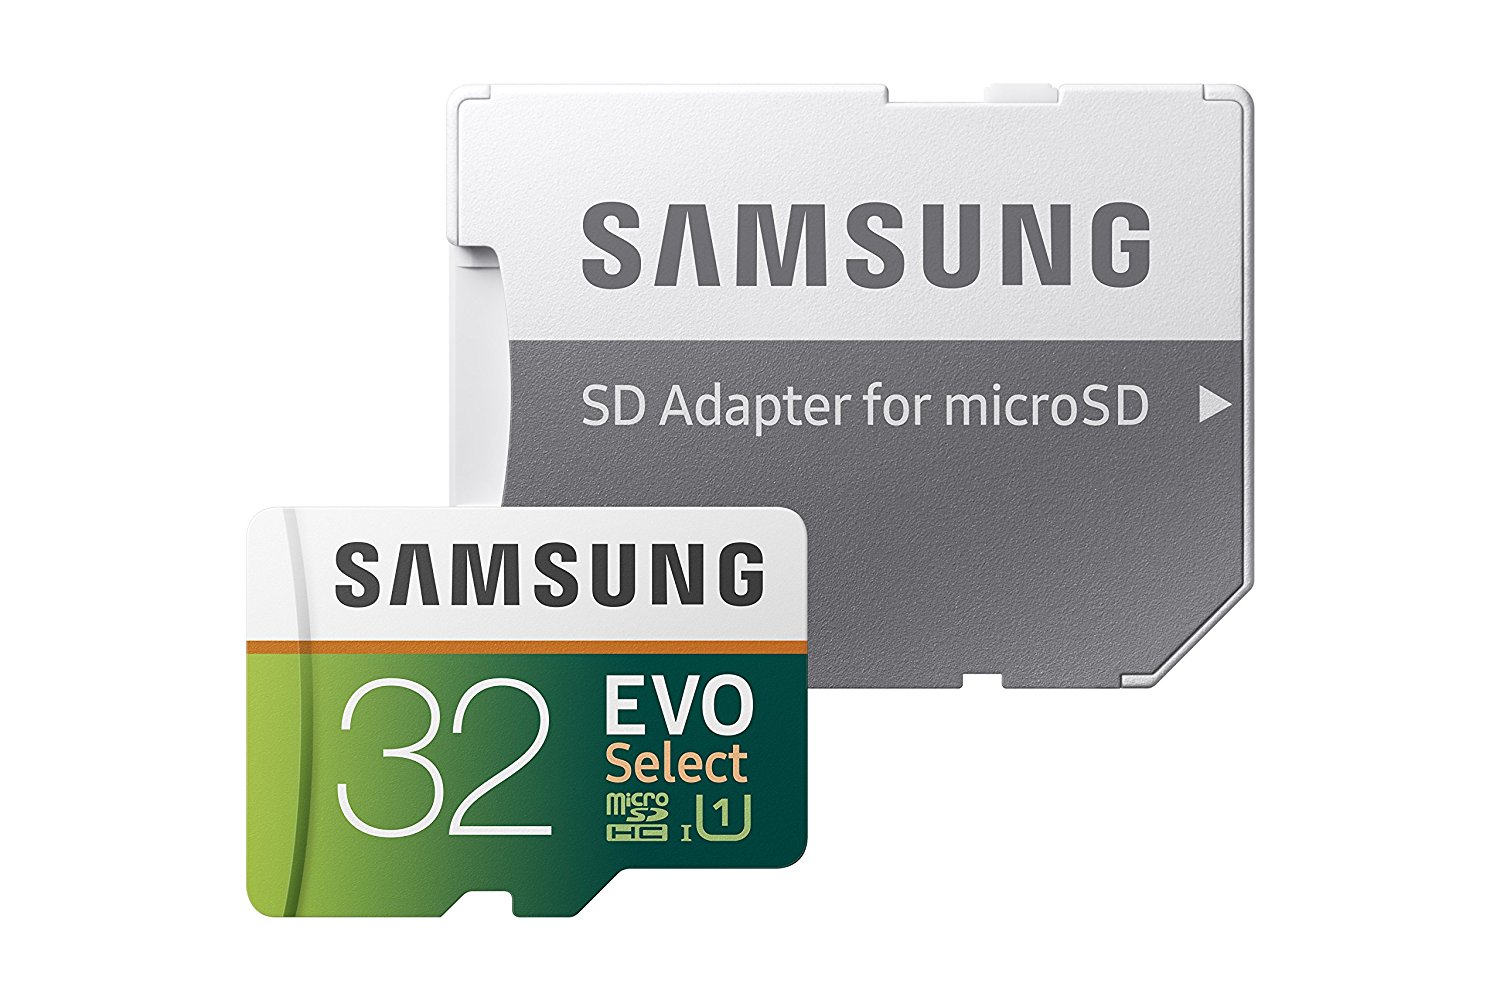 Samsung 32GB MicroSD EVO Select memory card with adapter for $7, 64GB for $11